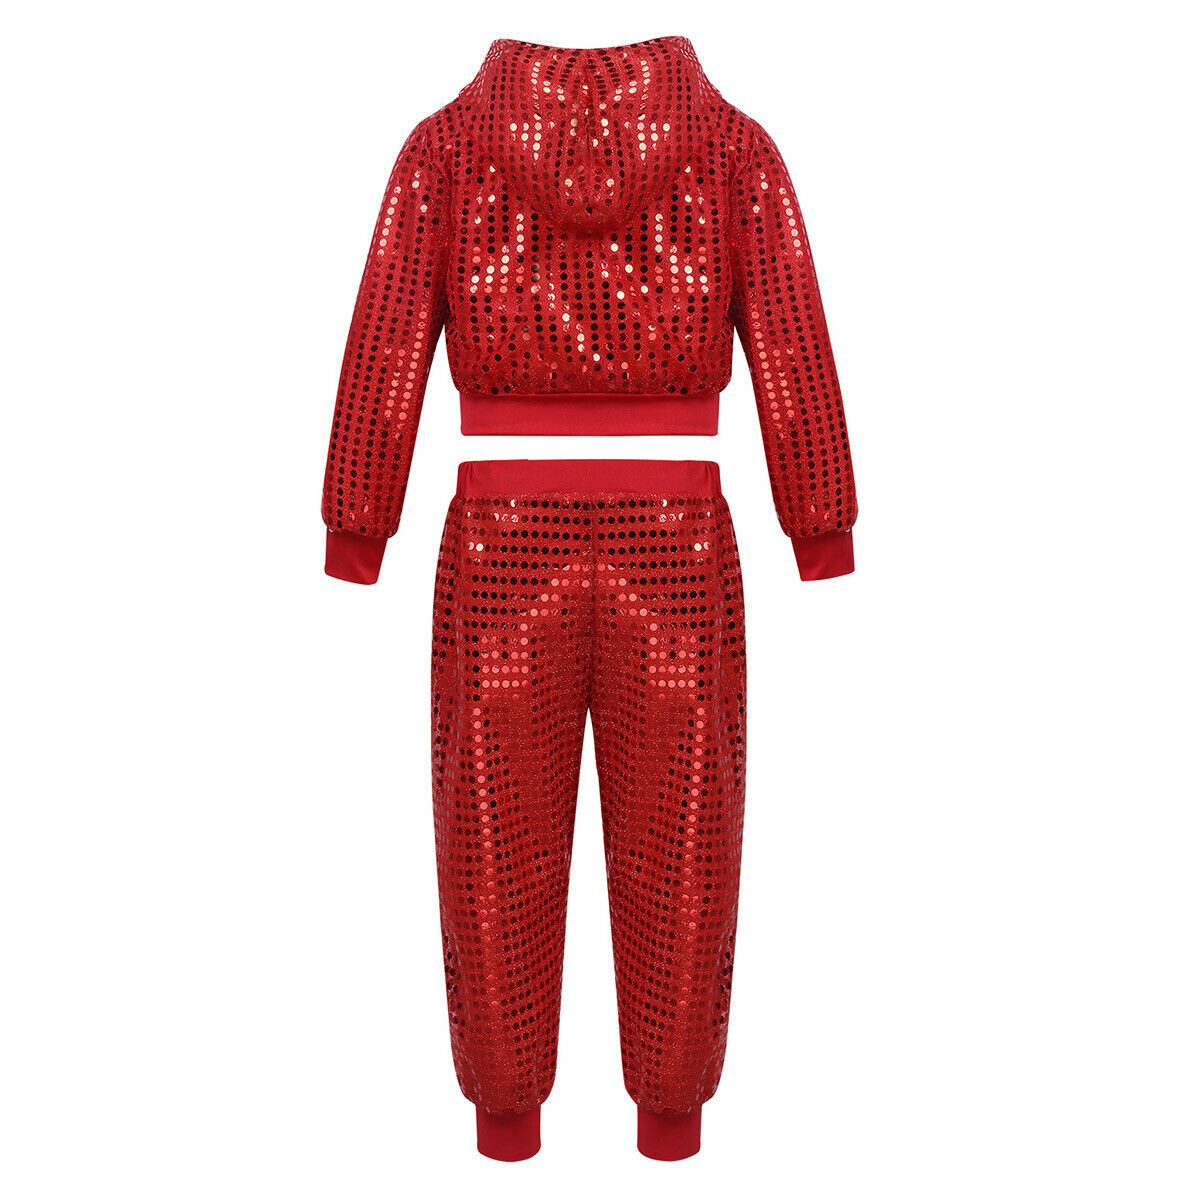 Kids Boys Girls Sequins Hooded Top Jacket Pants Dance Outfit ...